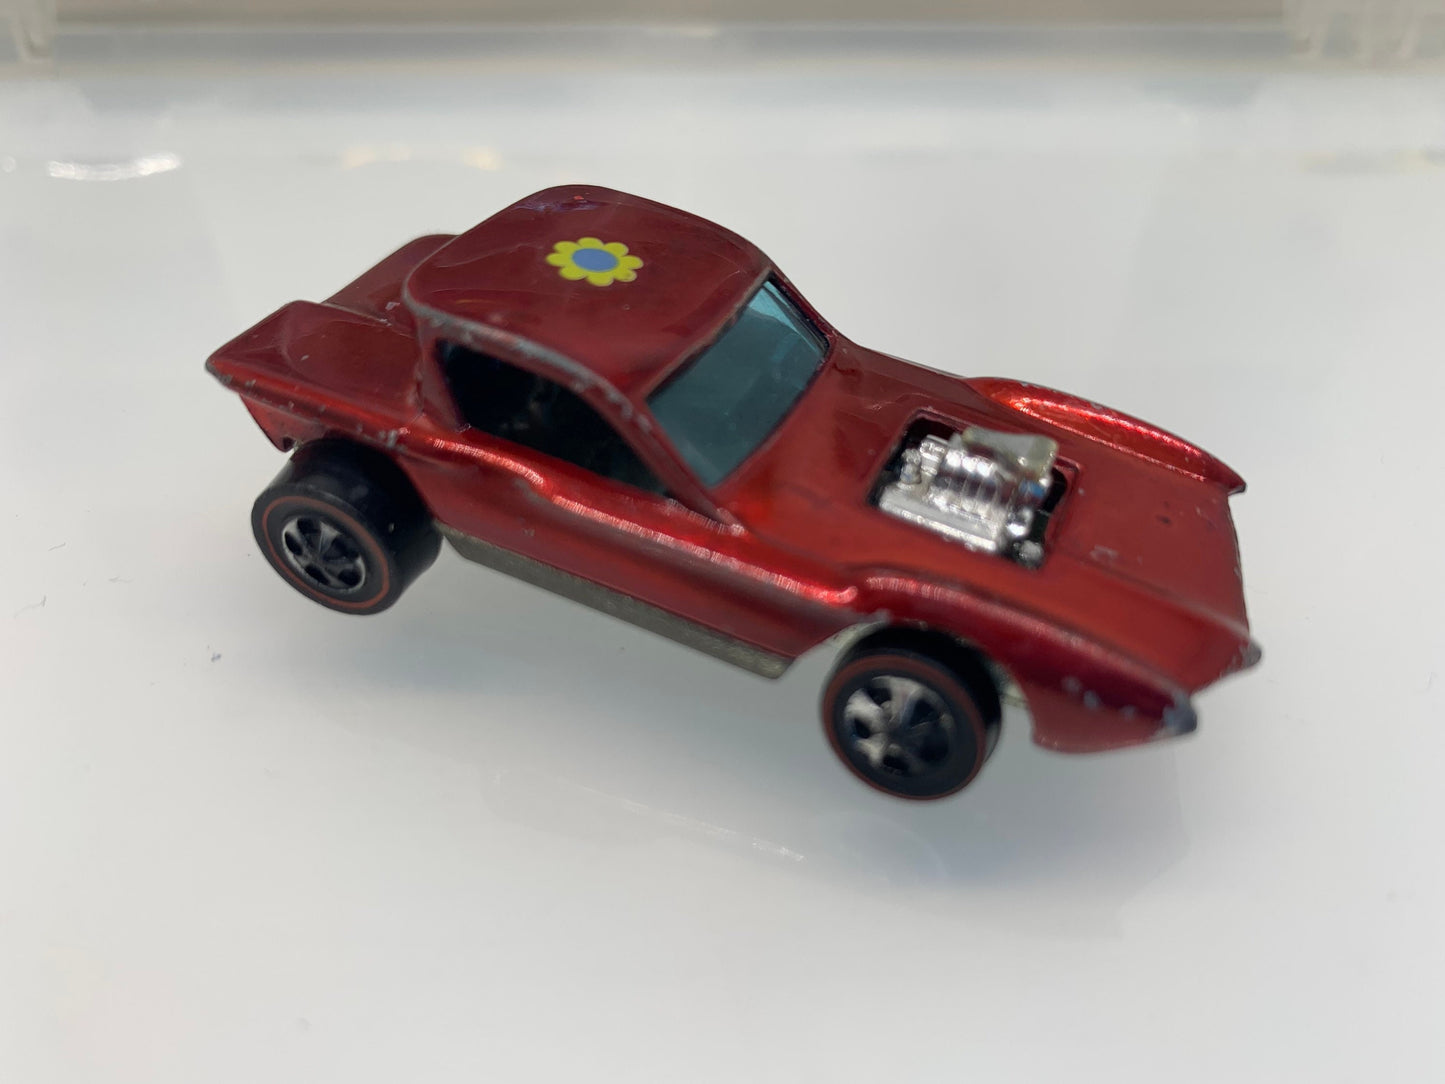 Hot Wheels Redline Python Red - Vintage Diecast Metal Cars - Vintage Collectibles - 1960's Toy Cars - Perfect Birthday Gift